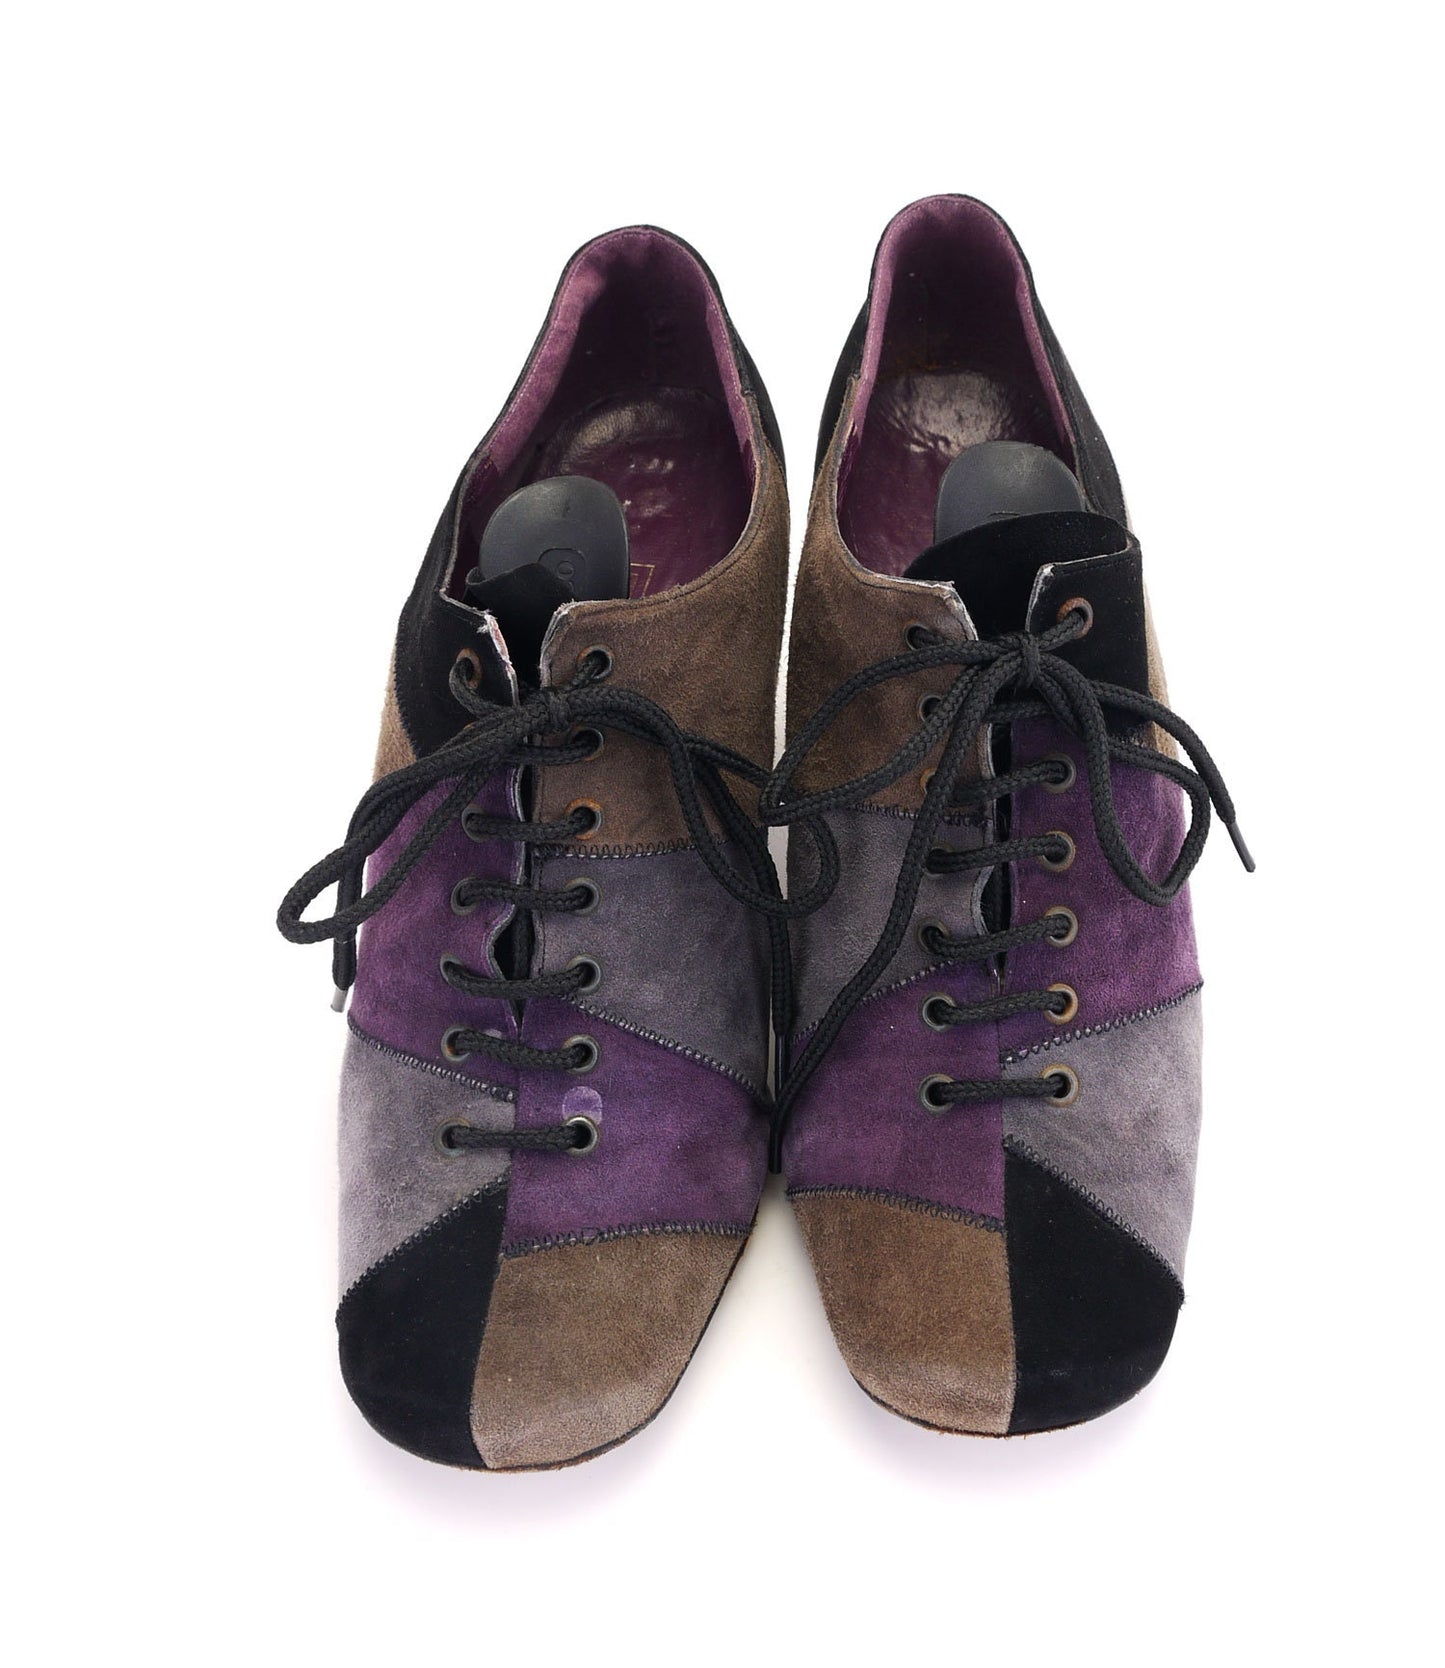 1960s 1970s Patchwork Lace Ups Shoes by Paradies UK 4.5